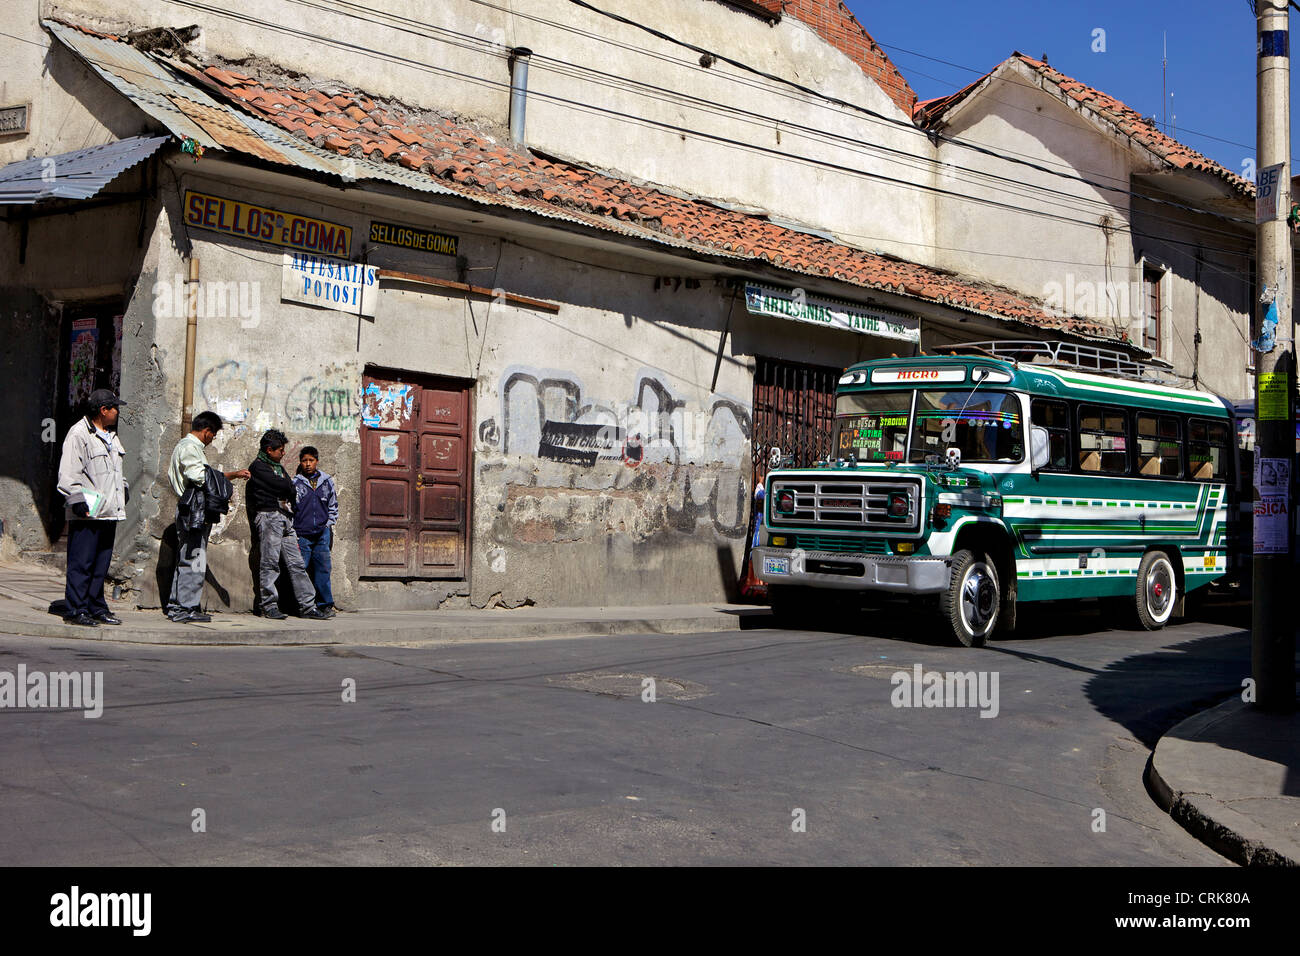 Waiting for a bus on the corner, La Paz, Bolivia, South America Stock Photo